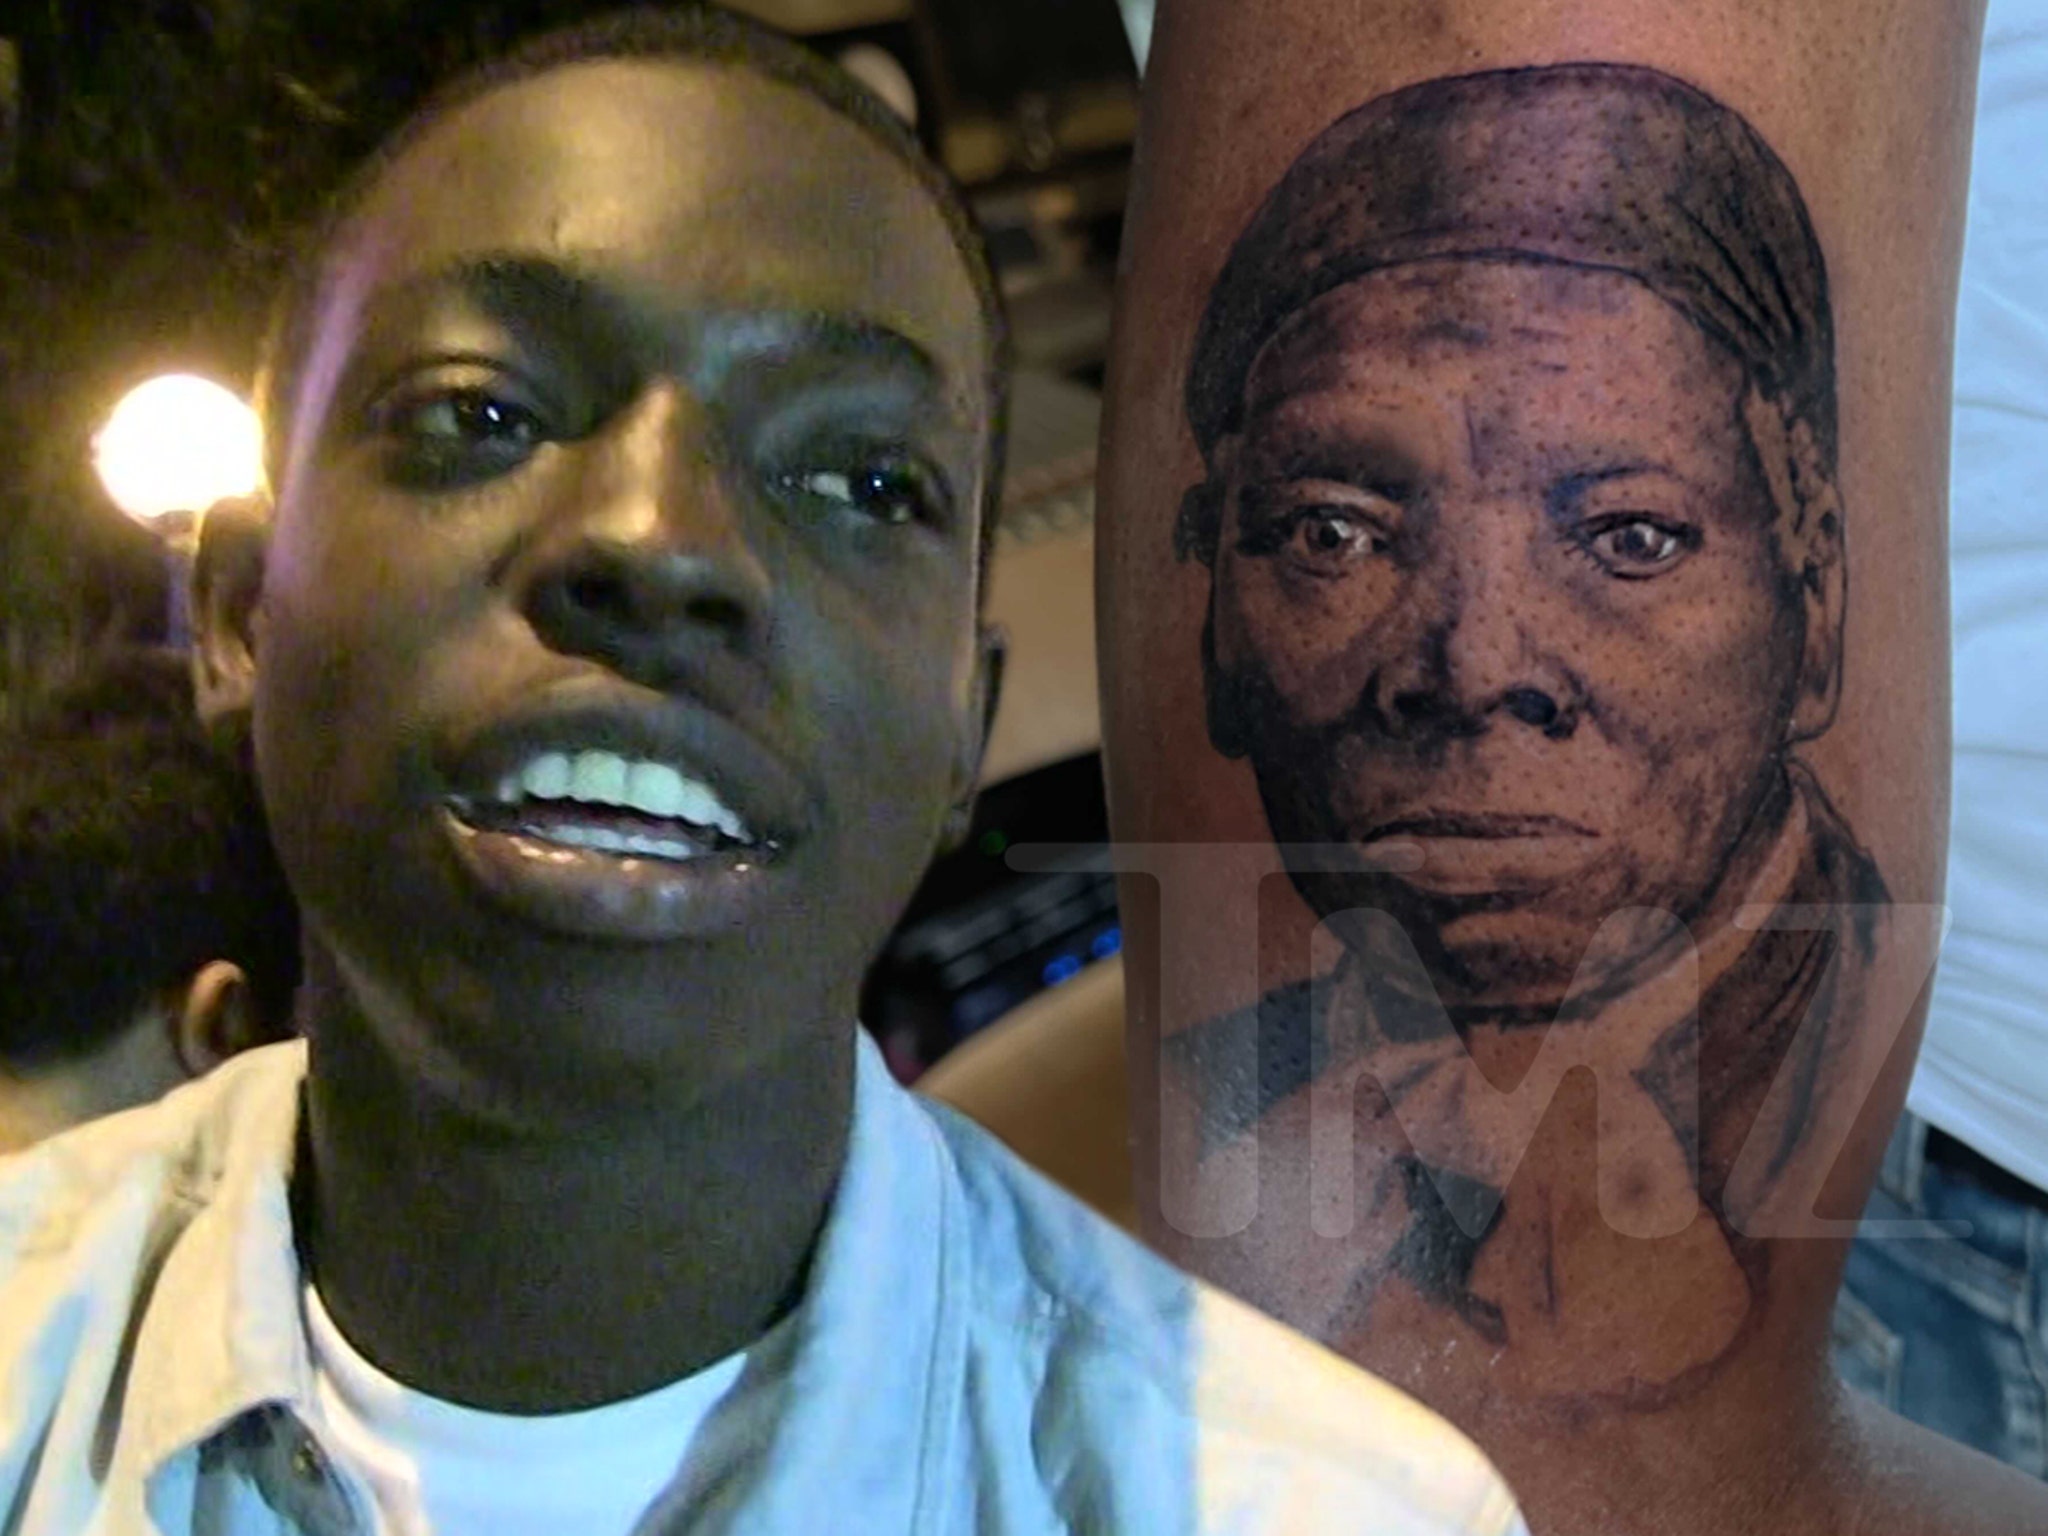 Progress on the homie zo s sleeve of Black Excellence So far Harriet  Tubman Rosa Parks and barackobama Cant wait to continue Done using   By Steve Butcher  Facebook